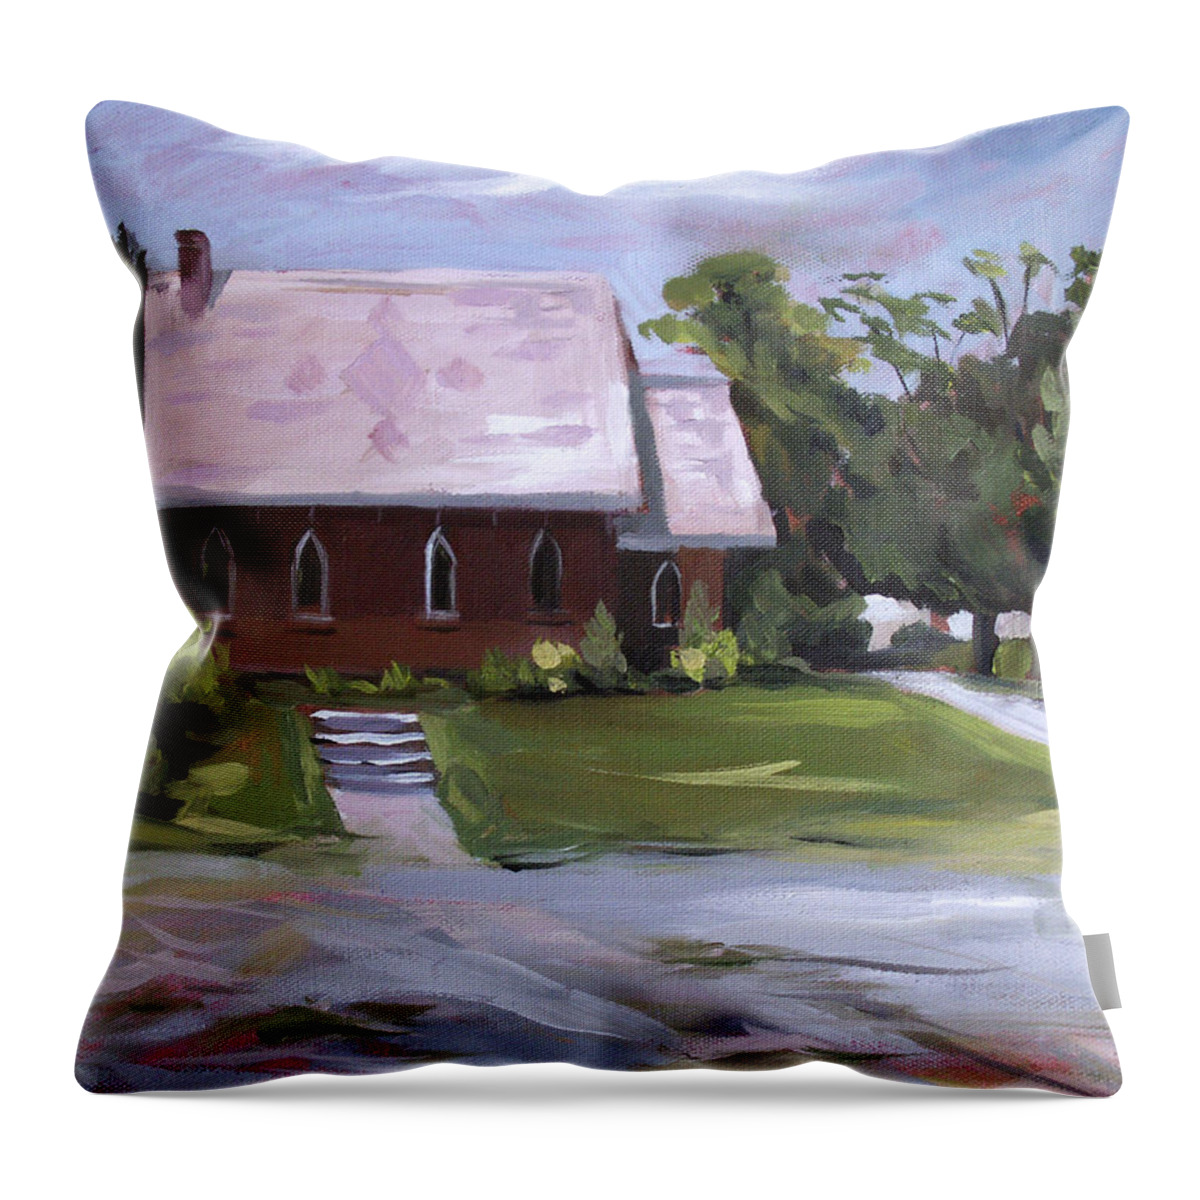 Churches Throw Pillow featuring the painting The Wyben Union Church by Nancy Griswold